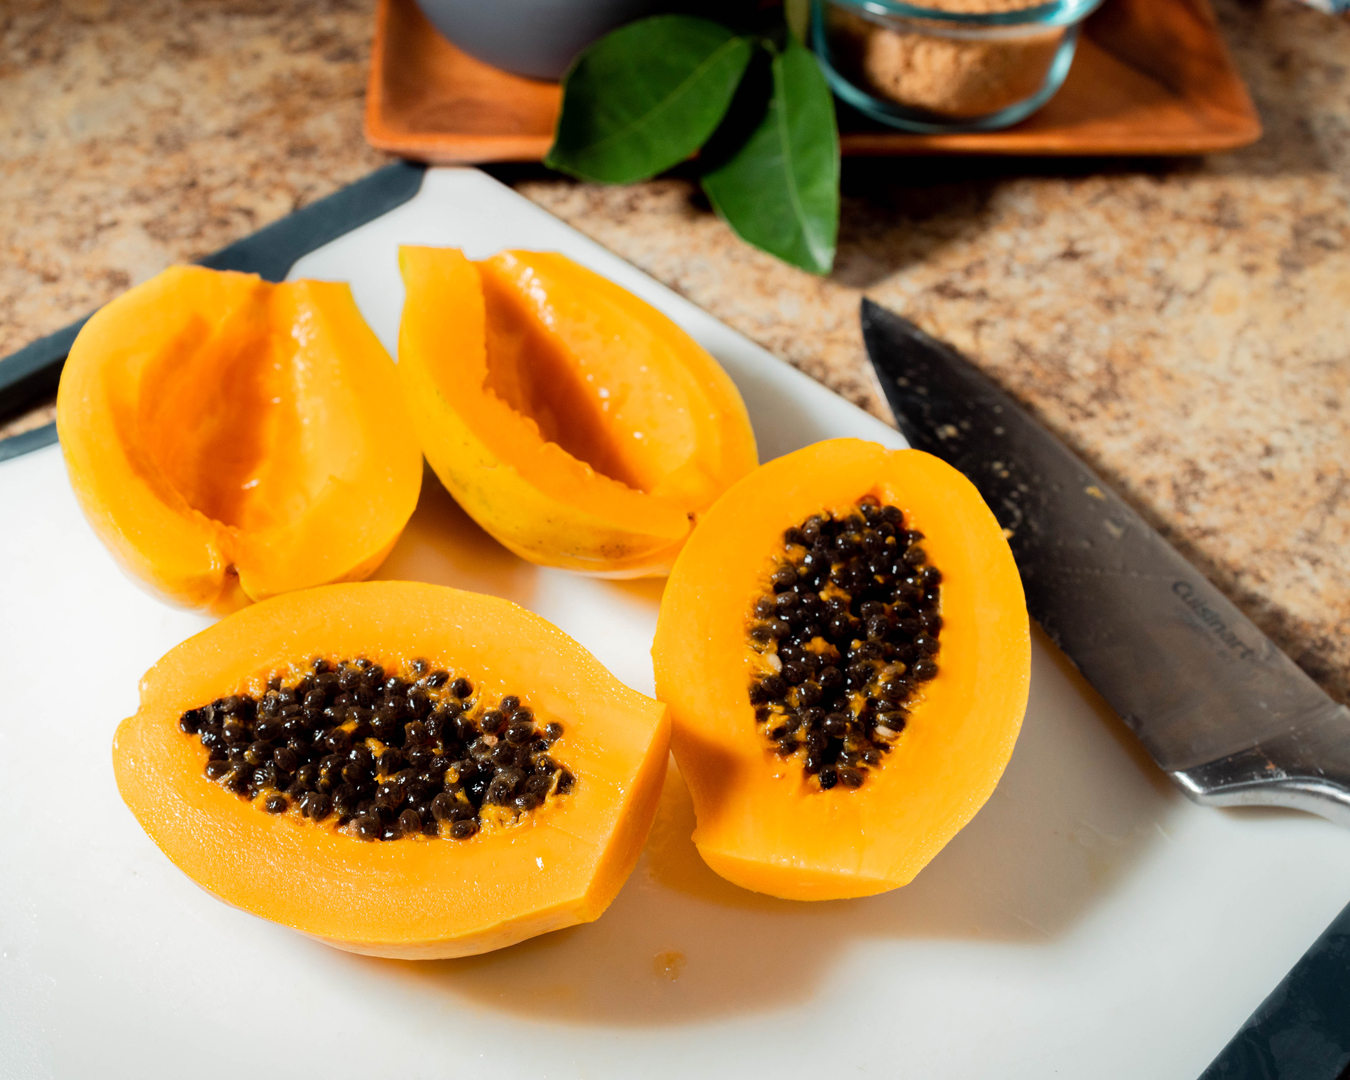 To prepare the papayas, cut them in halves and use a spoon to remove the seeds.